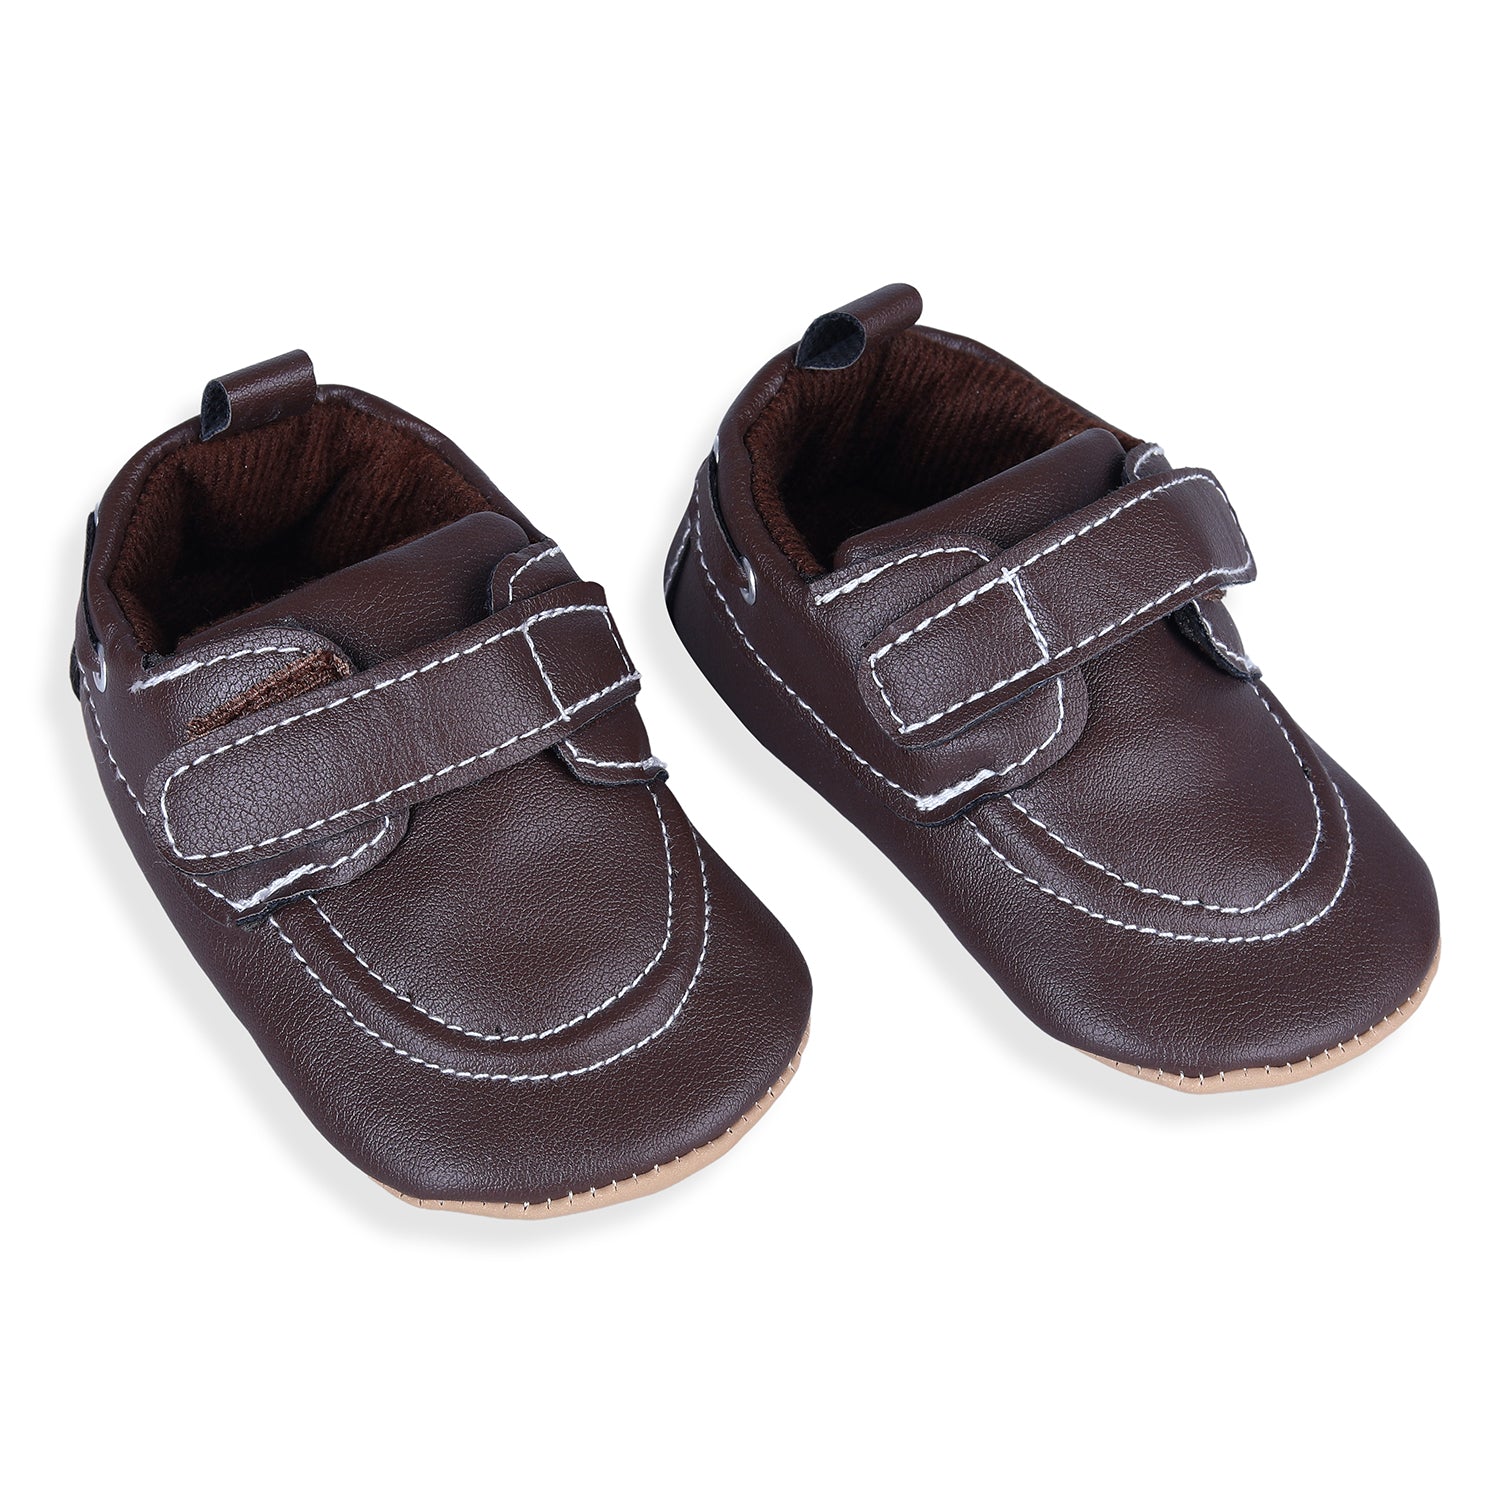 Solid Hookloop Stylish Leather Velcro Shoes - Brown - Baby Moo